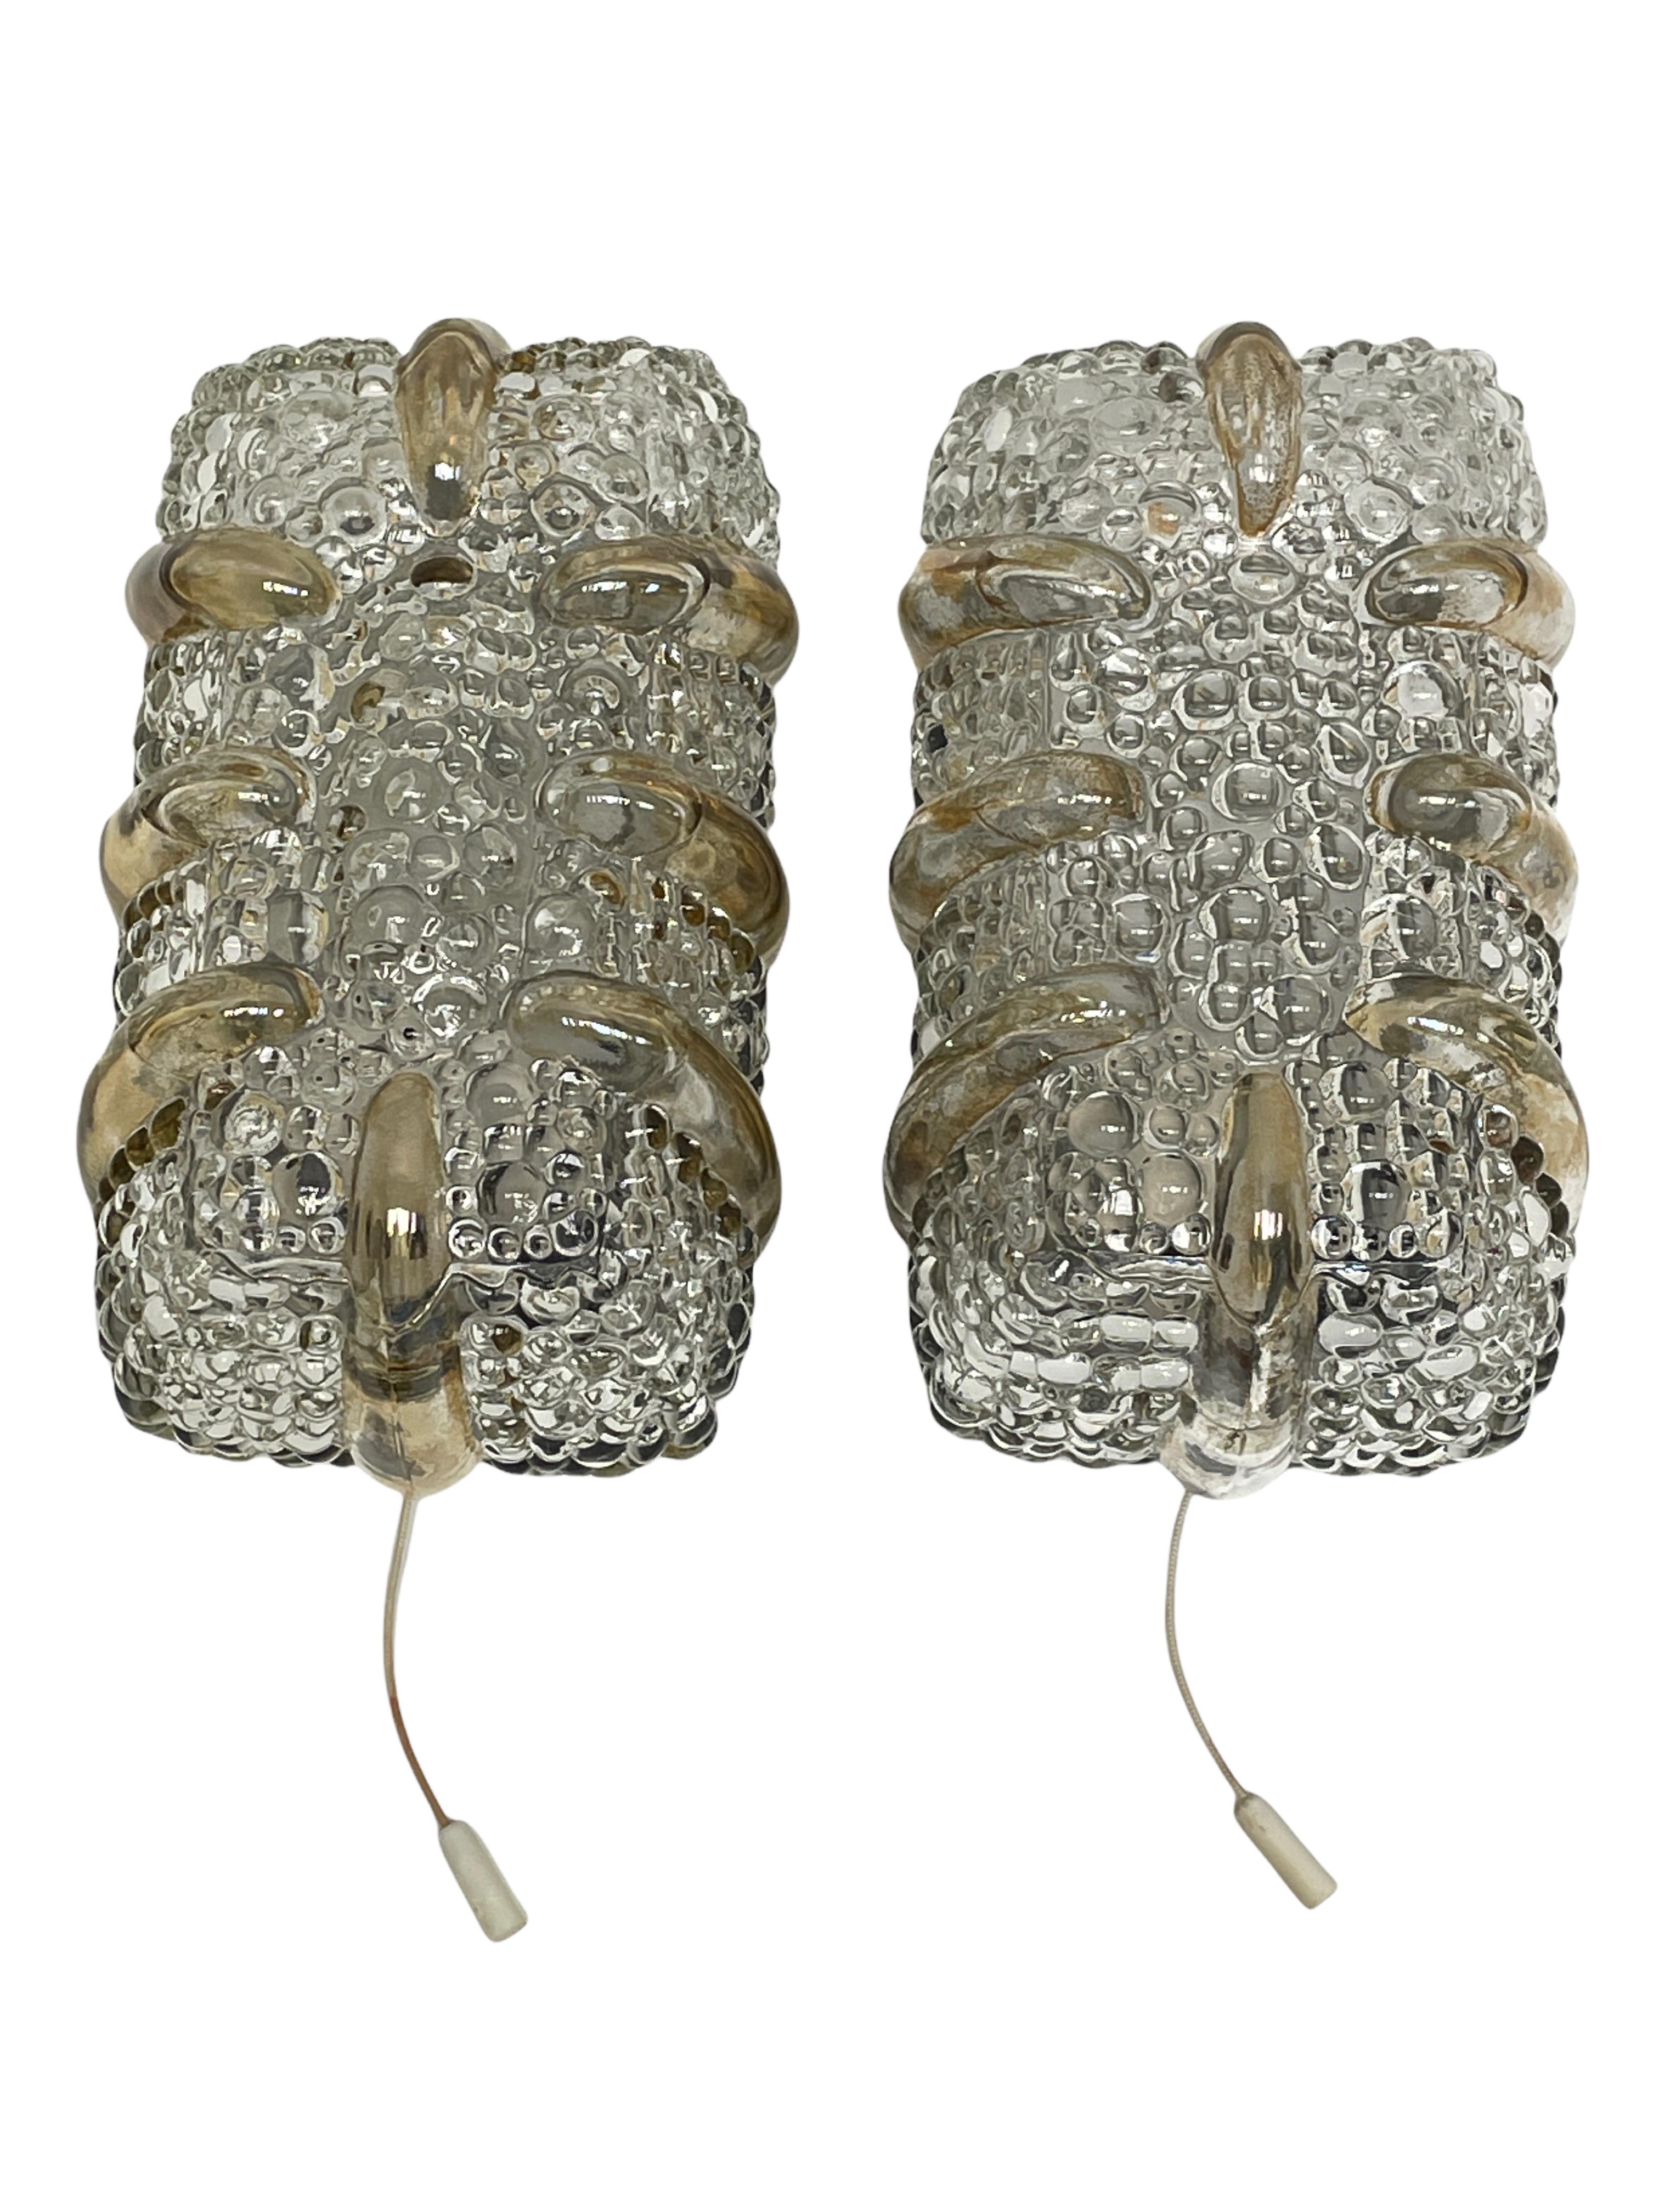 Pair of beautiful wall lights, made by Massive Leuchten, in textured glass, affixed against a metal socket with black lacquered base, circa 1970s. An iconic design from the 1970s and still relevant today. Good condition, consistent with age and use.